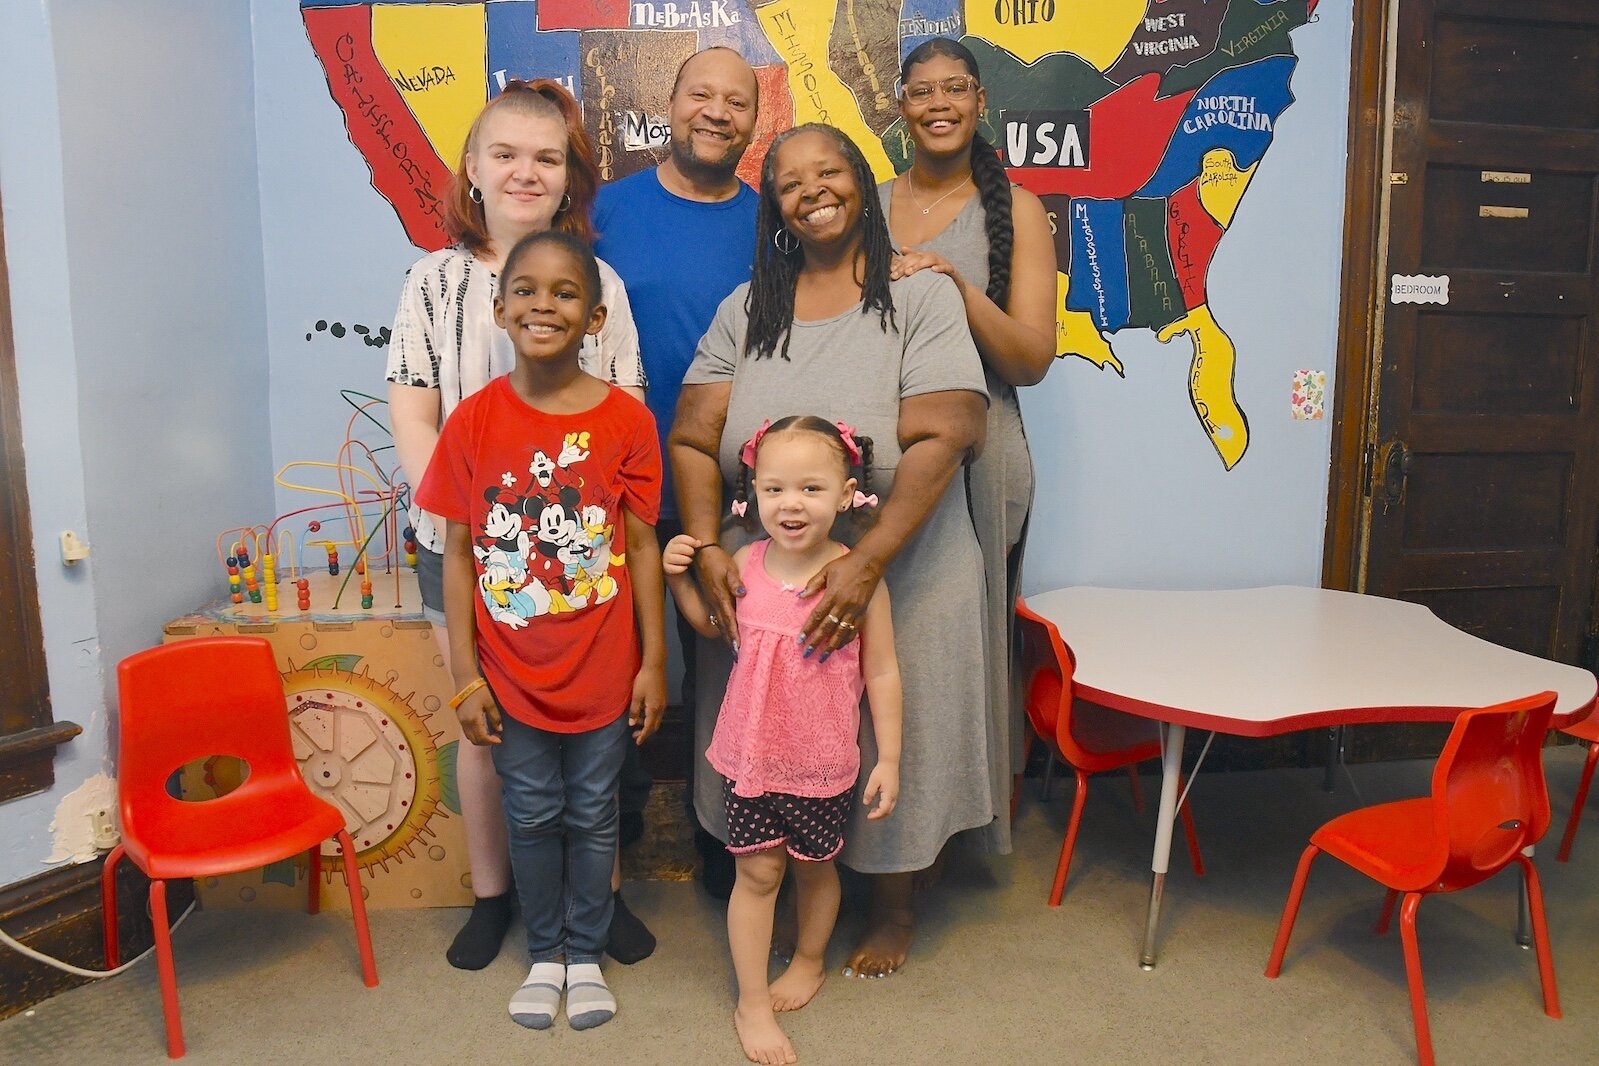 Marcia Trigg and her husband, Allen, with four of their children, from left, Makiya, Ellenah, Elloise, and Kenzie.